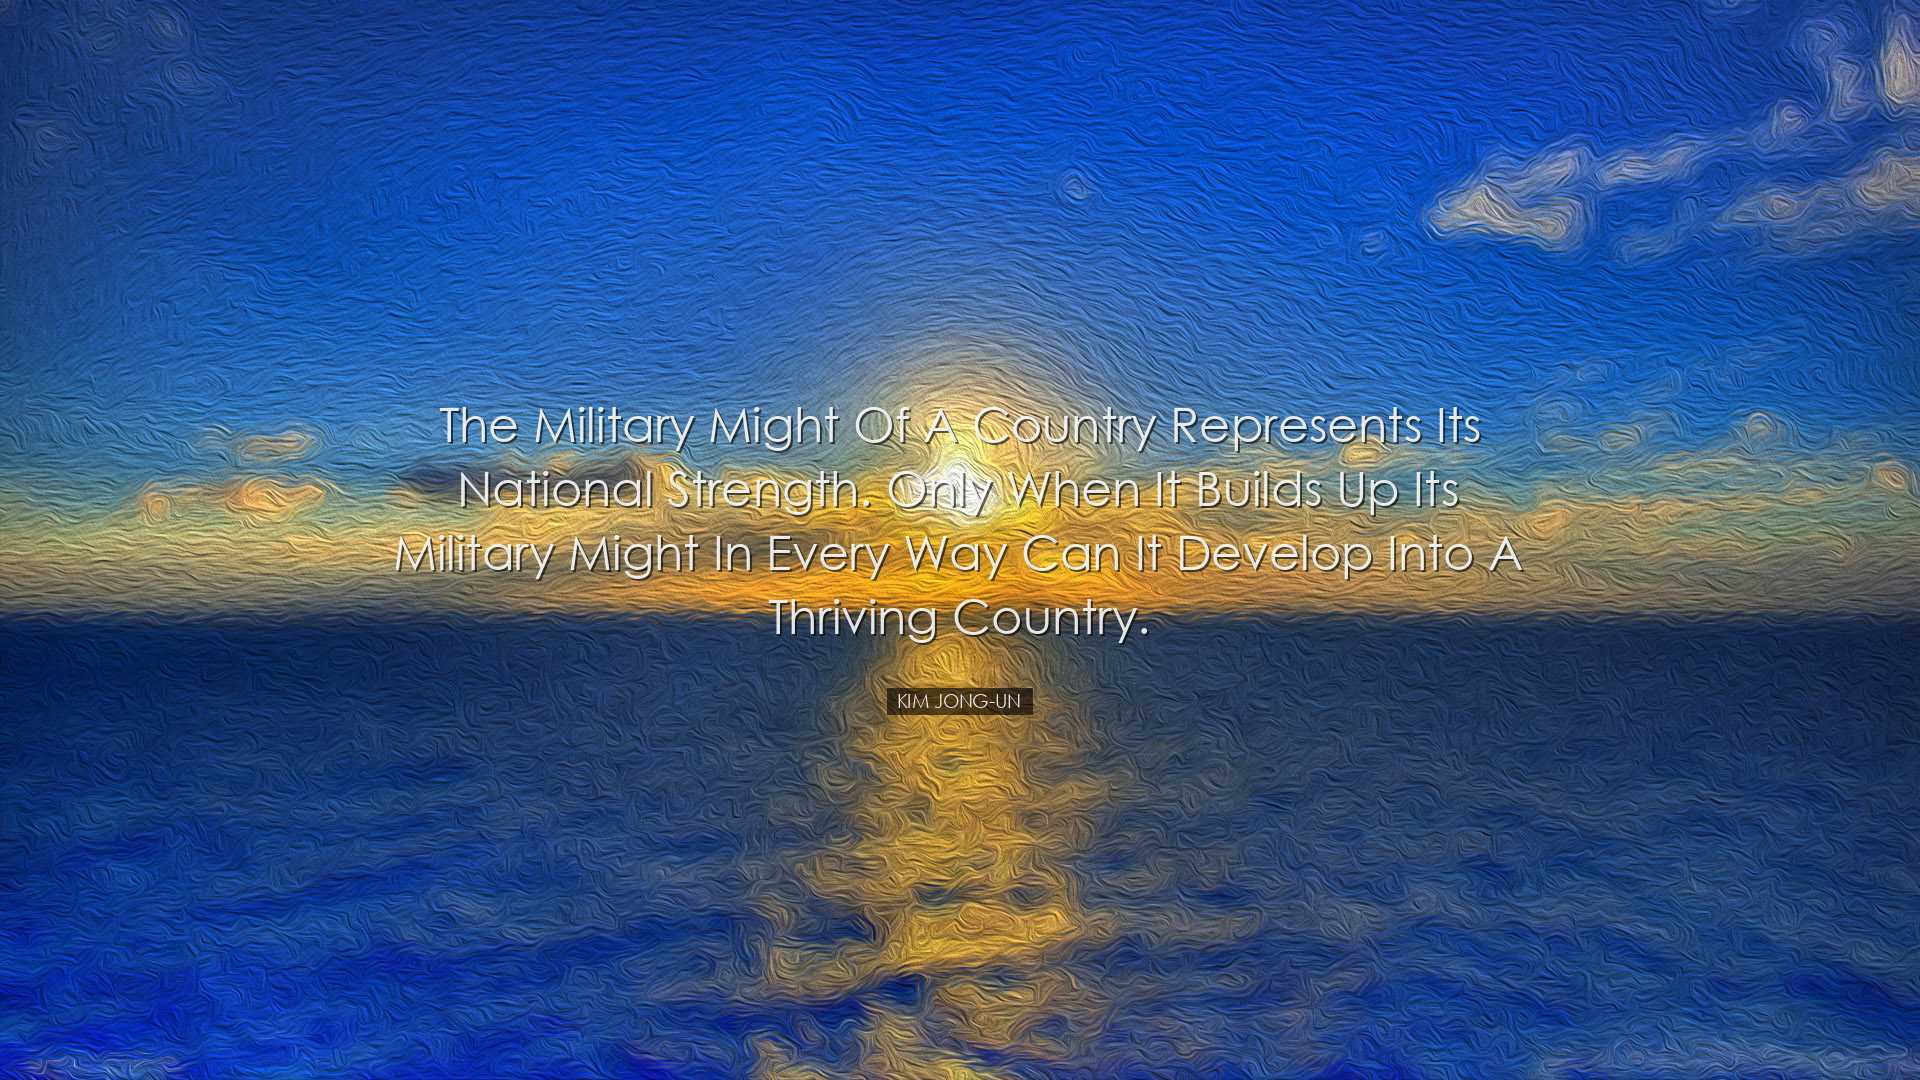 The military might of a country represents its national strength.